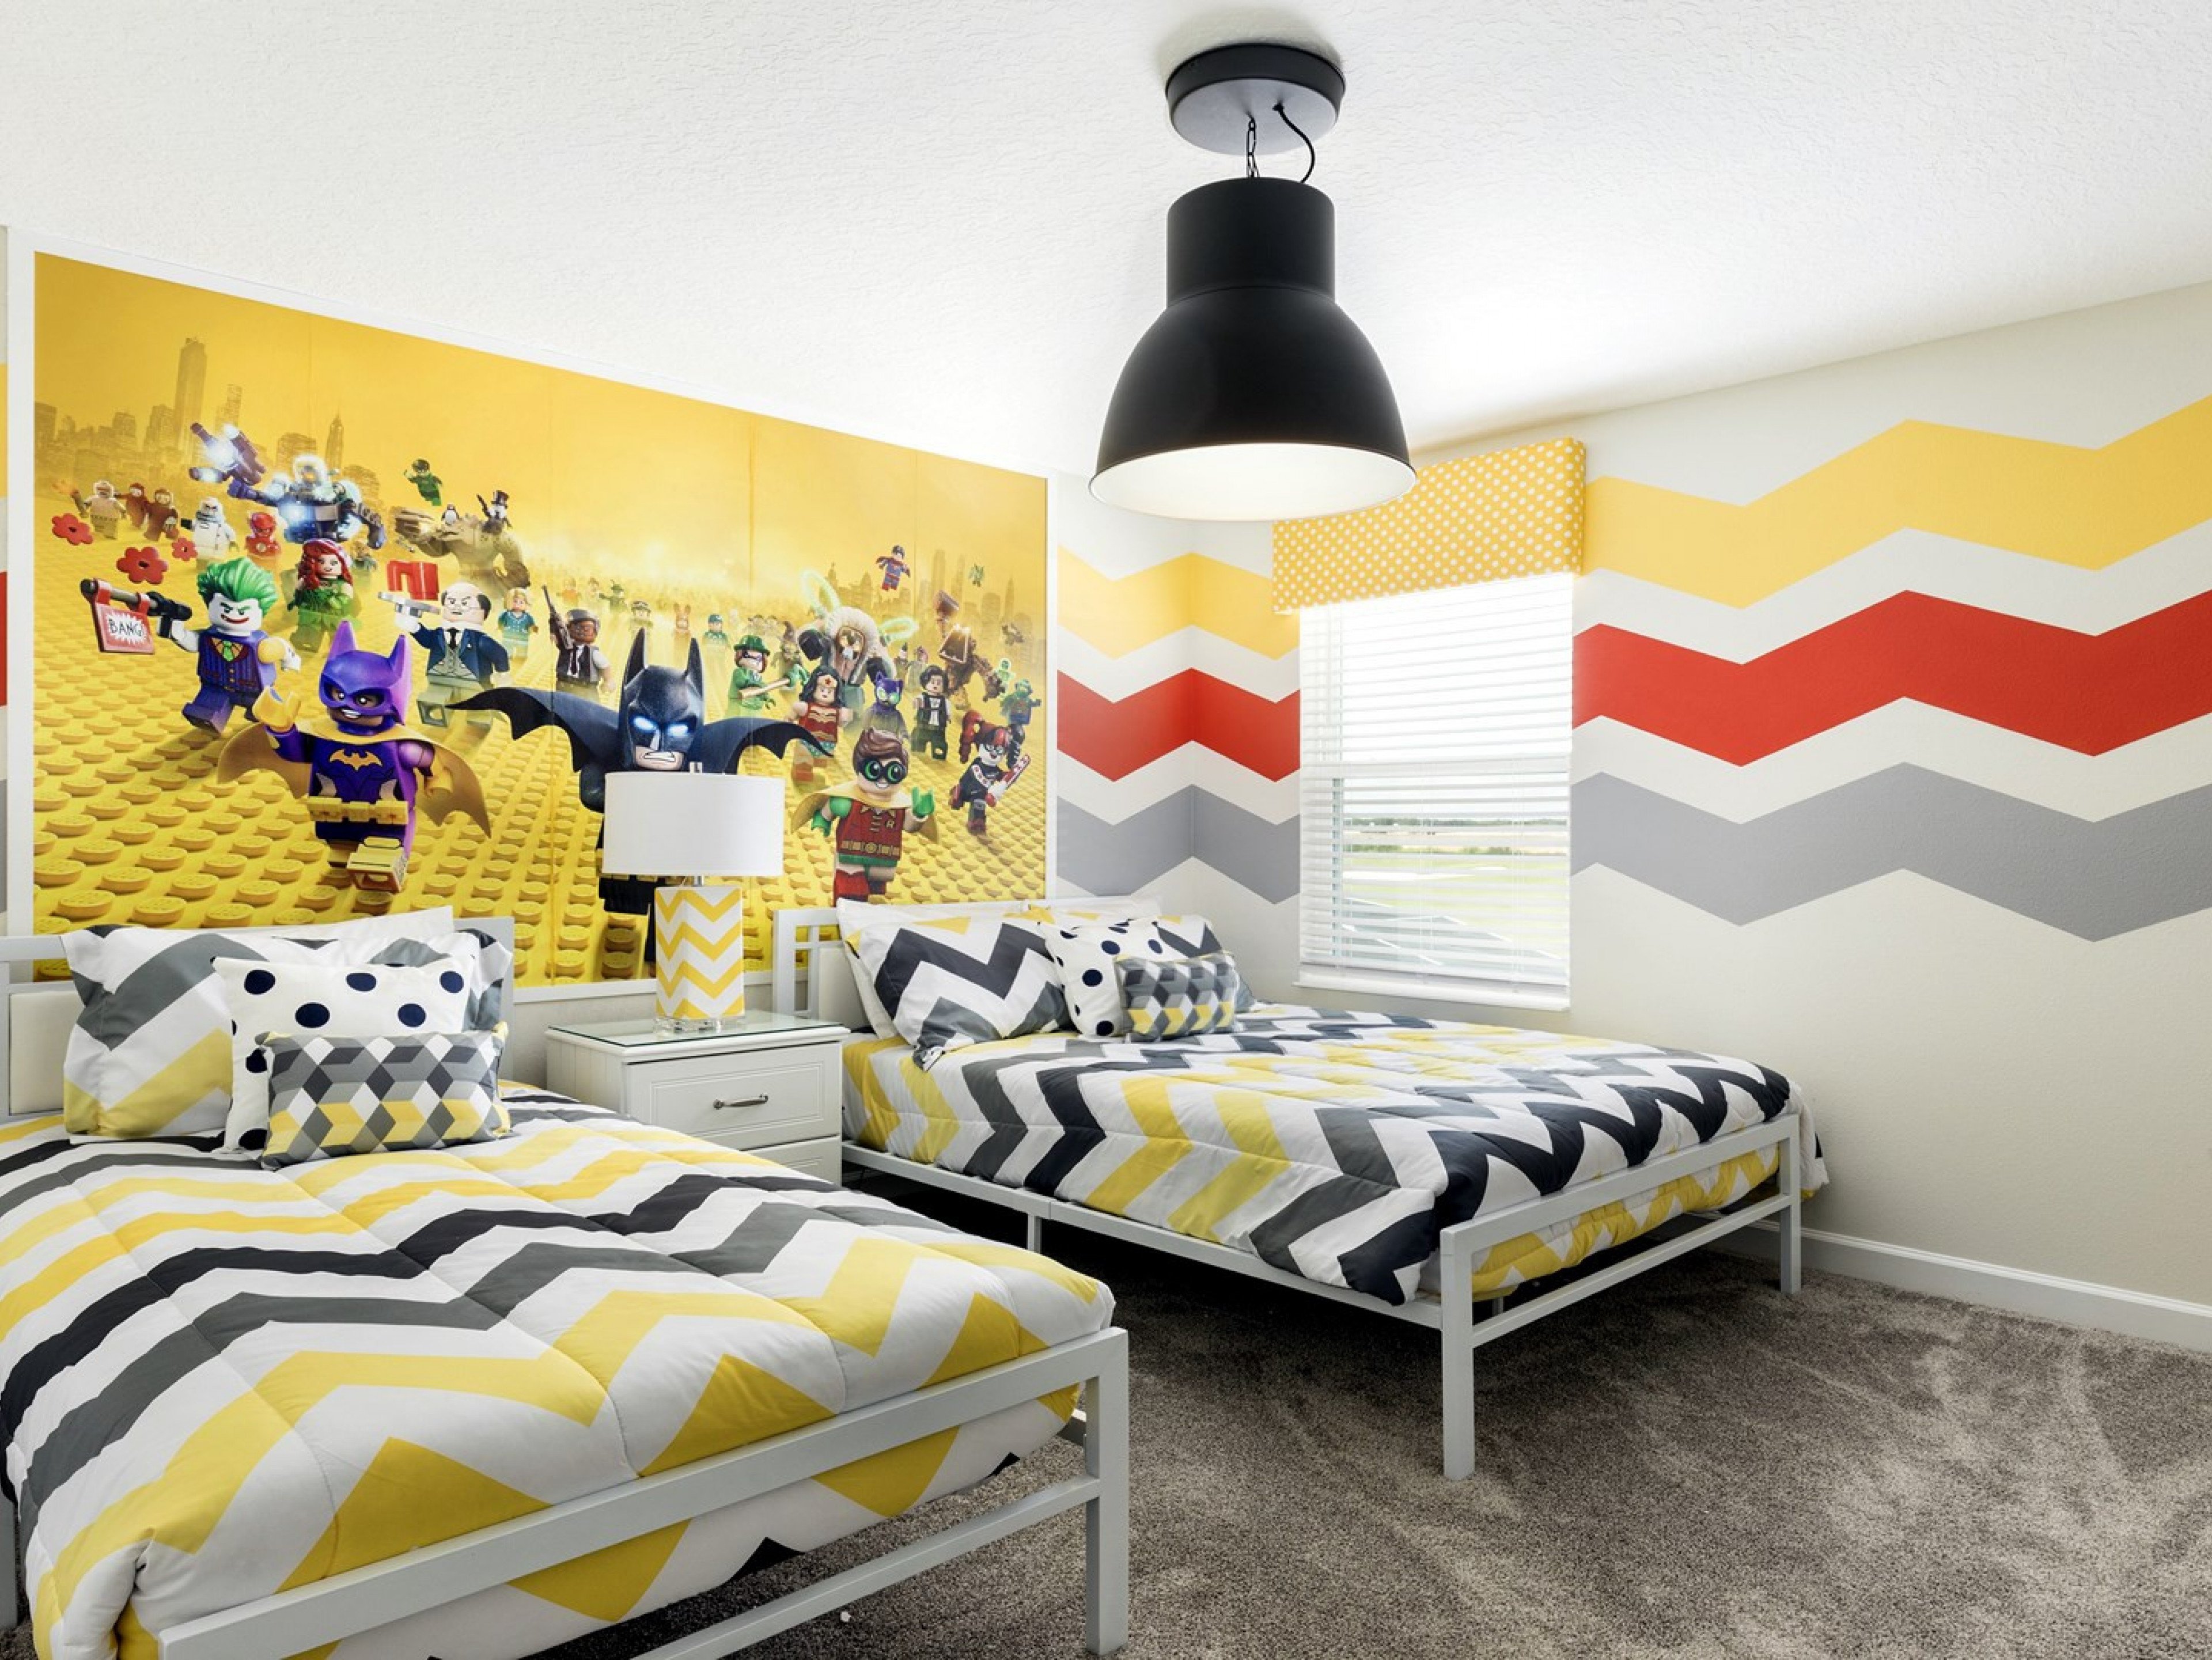  Orlando homes with Legoland-themed rooms - Championsgate 1769